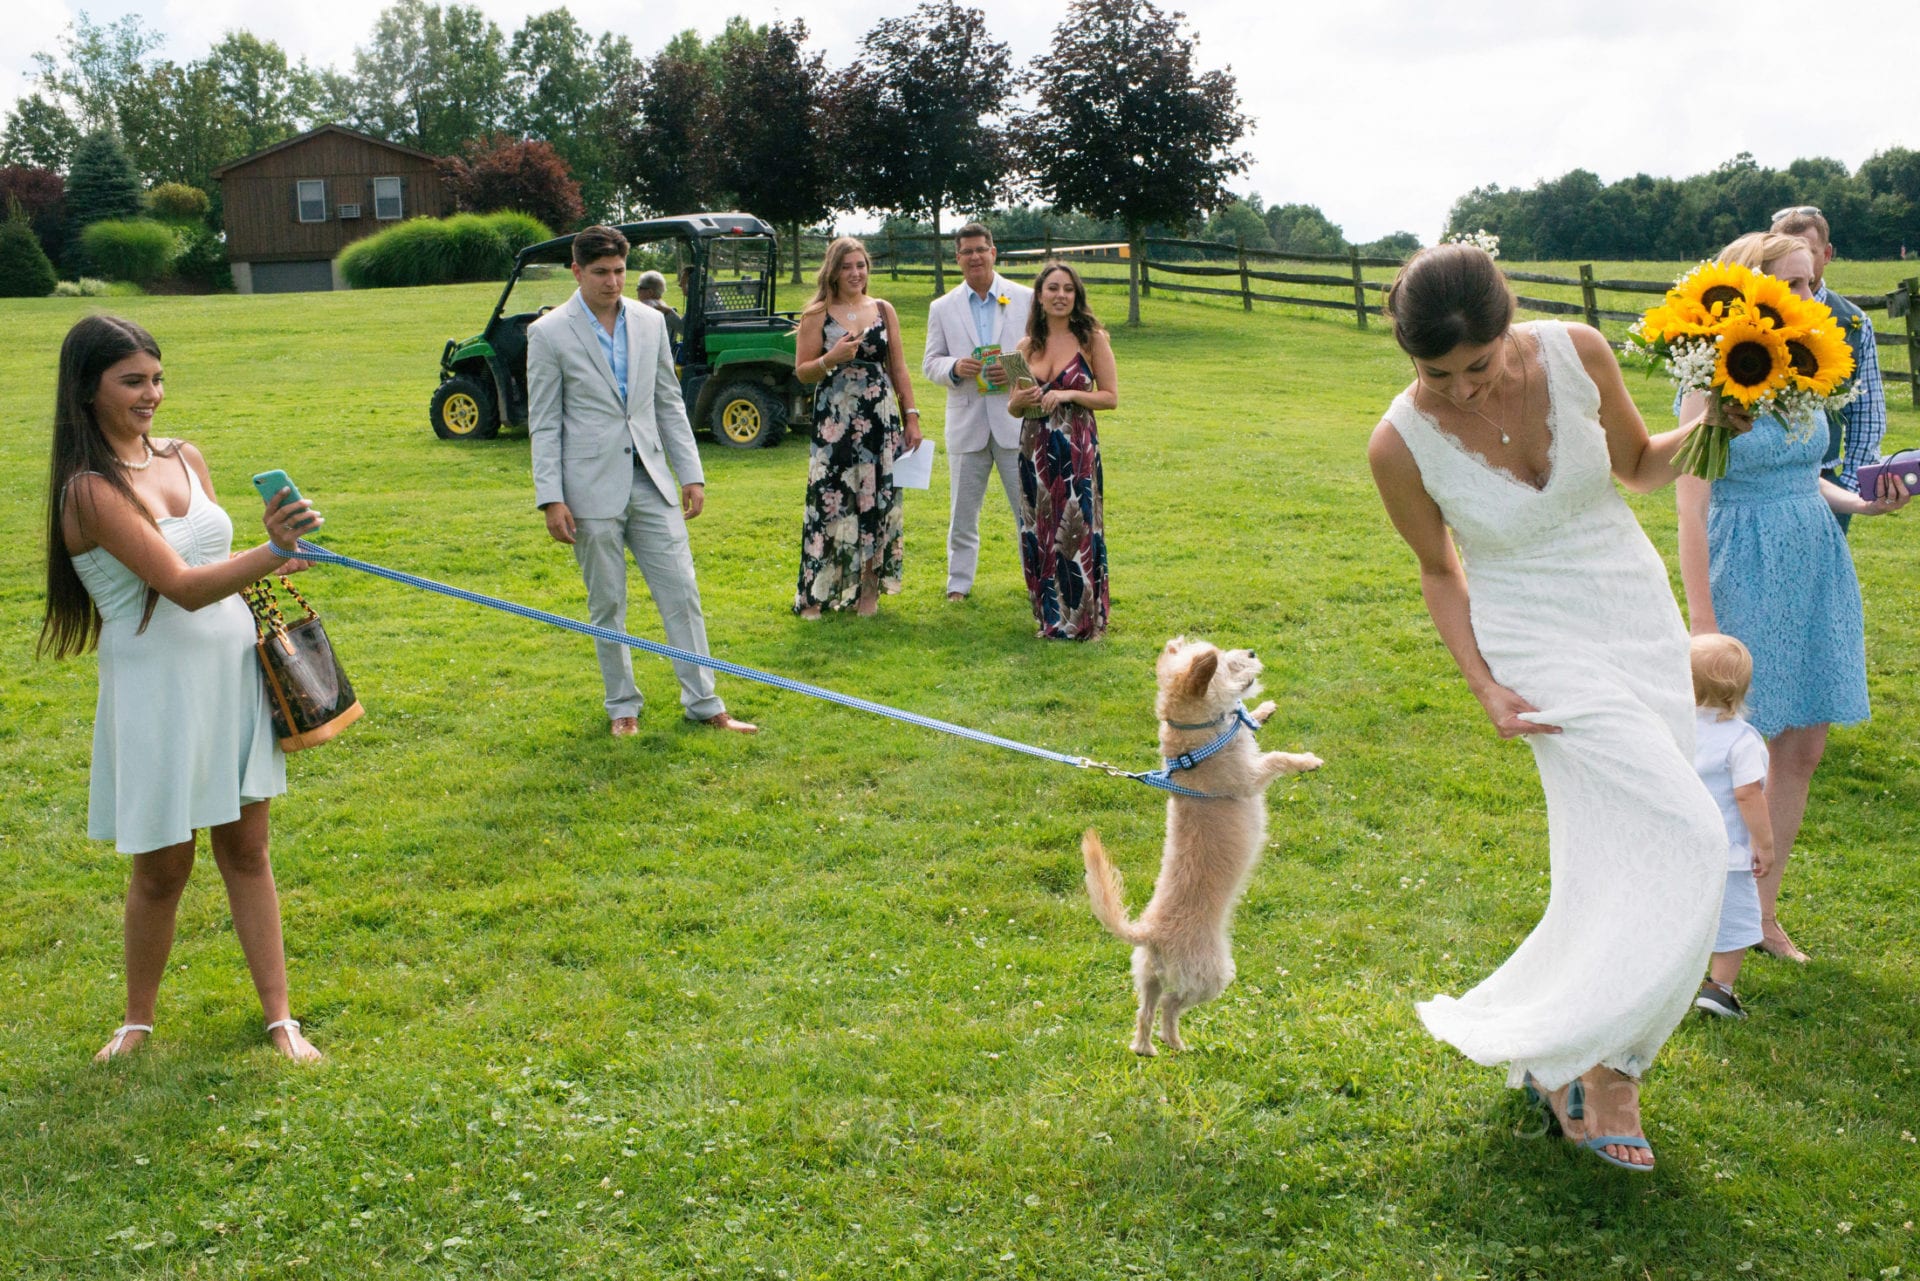 A terrier leaps into the air at the end of a leash as a bride bends to avoid his dirty paws.